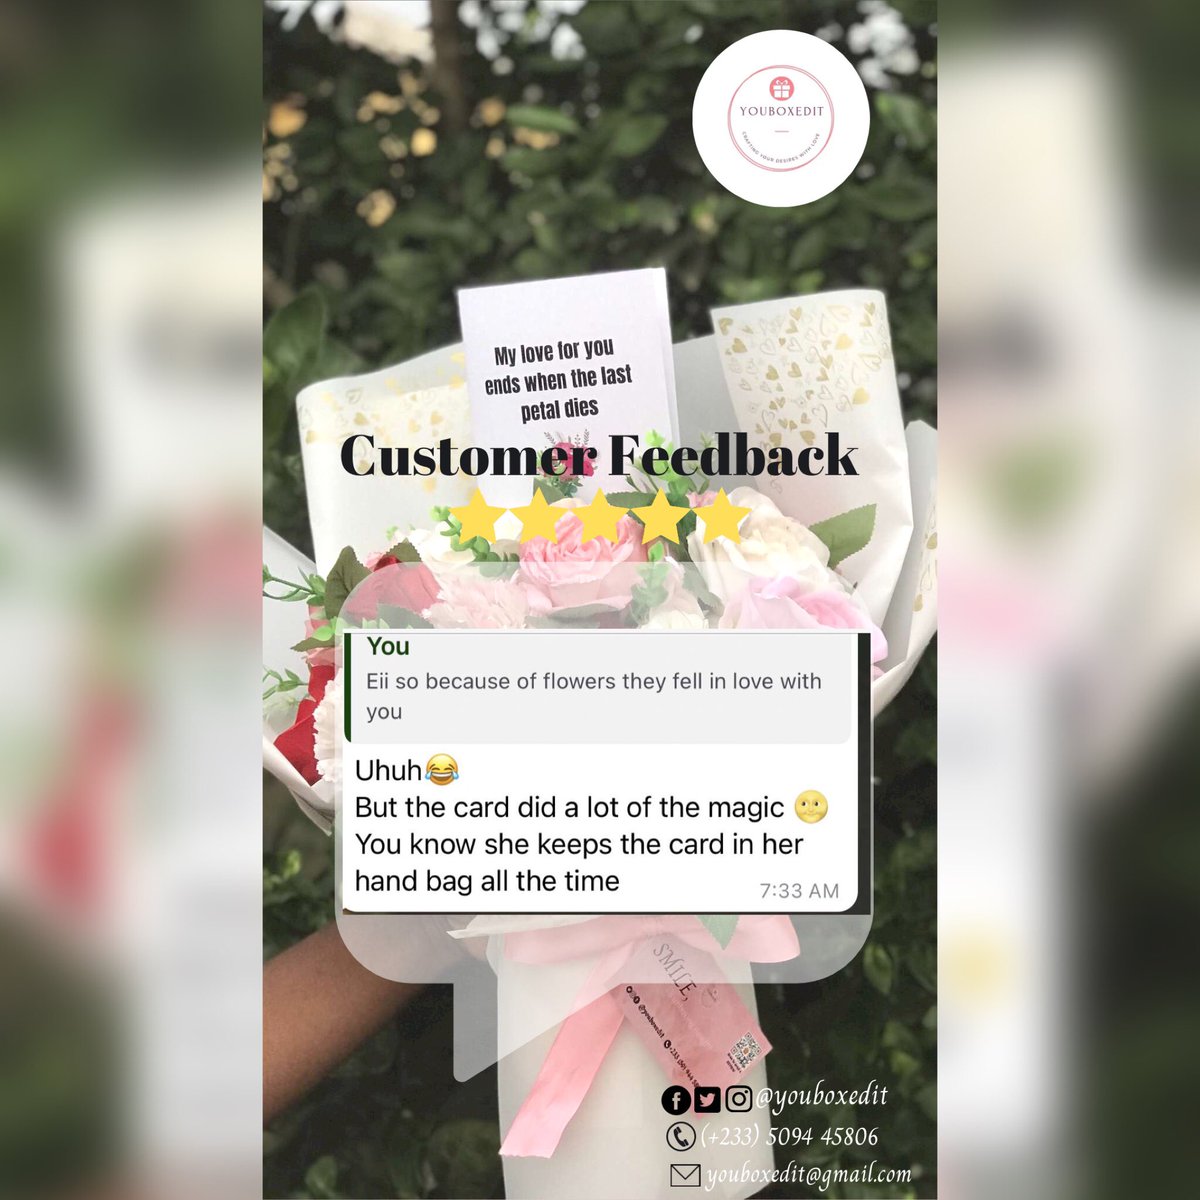 🥺 Feedback like this makes me emotional ❤️

Time for you to get that #YBI experience, call or send us a dm anytime on +233 (50) 9445806 ❤️

#youboxedit #review #feedback #blackownedbusiness #giftshop #flowers #fauxflowers #customisedgiftsgh #giftideas #giftsforher #accra #Ghana